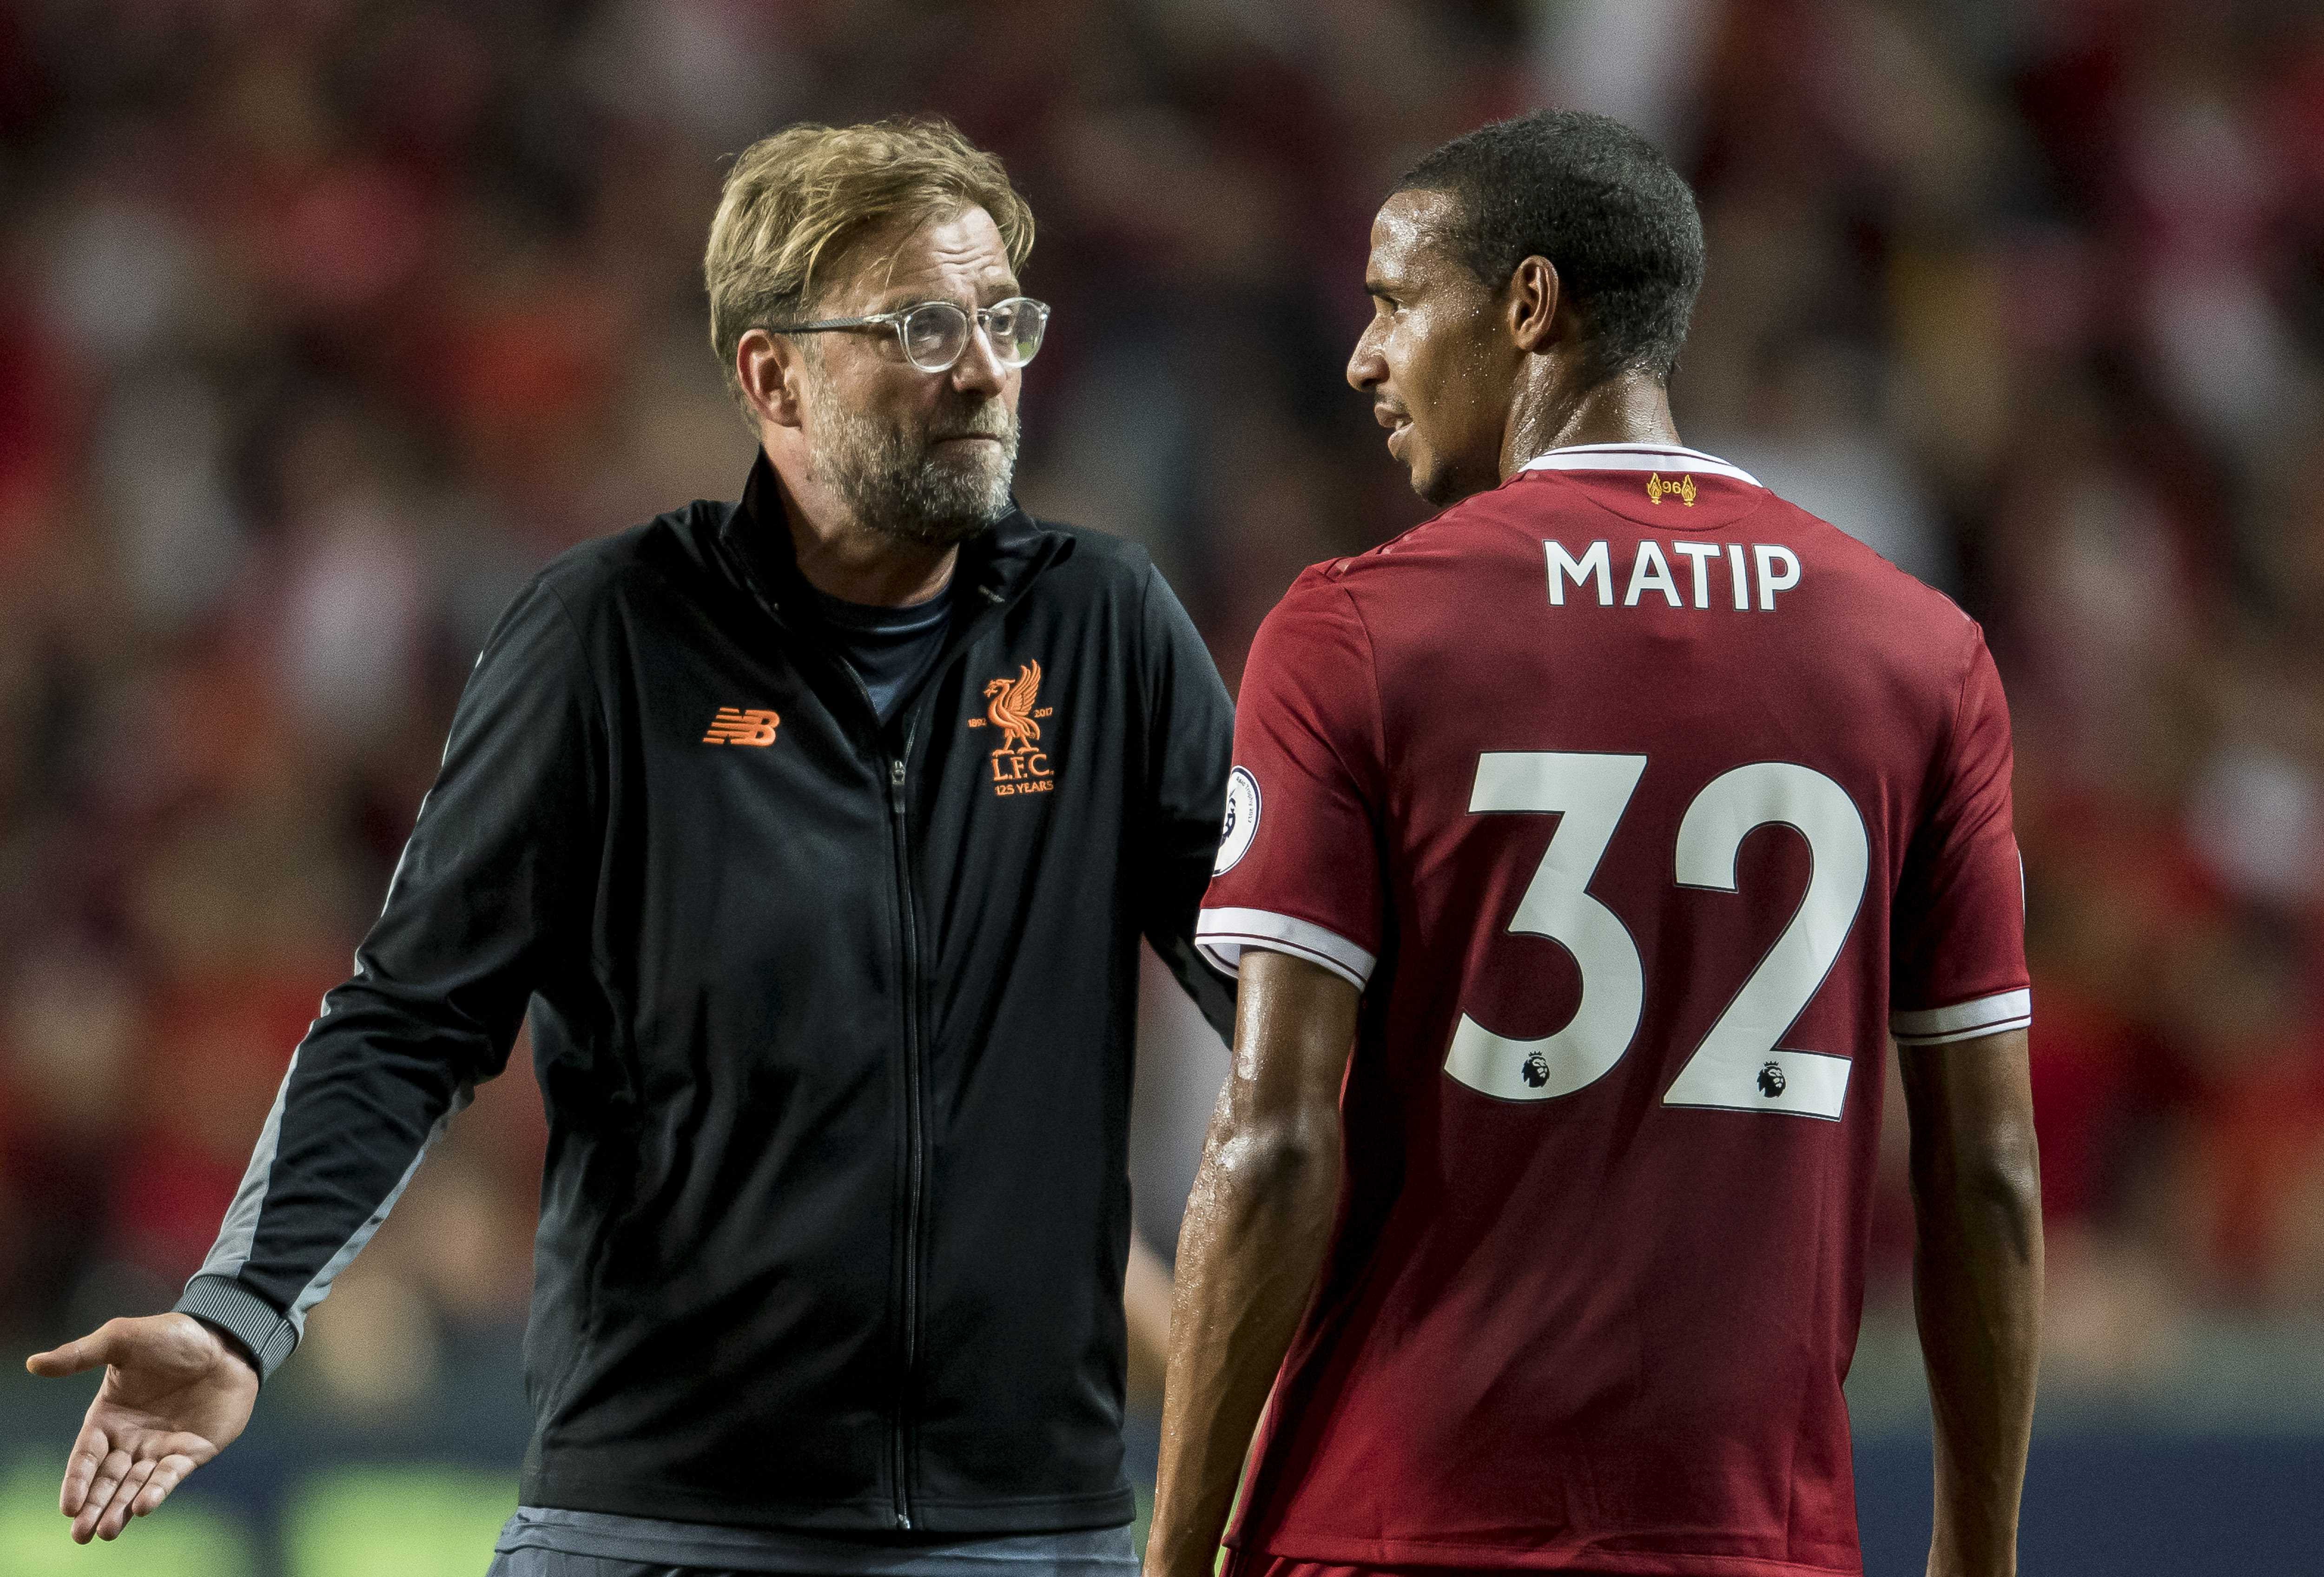 HONG KONG, HONG KONG - JULY 22: Liverpool FC Coach Jurgen Klopp (L) talks to Liverpool FC defender Joel Matip (R) during the Premier League Asia Trophy match between Liverpool FC and Leicester City FC at Hong Kong Stadium on July 22, 2017 in Hong Kong, Hong Kong. (Photo by Victor Fraile/Getty Images )